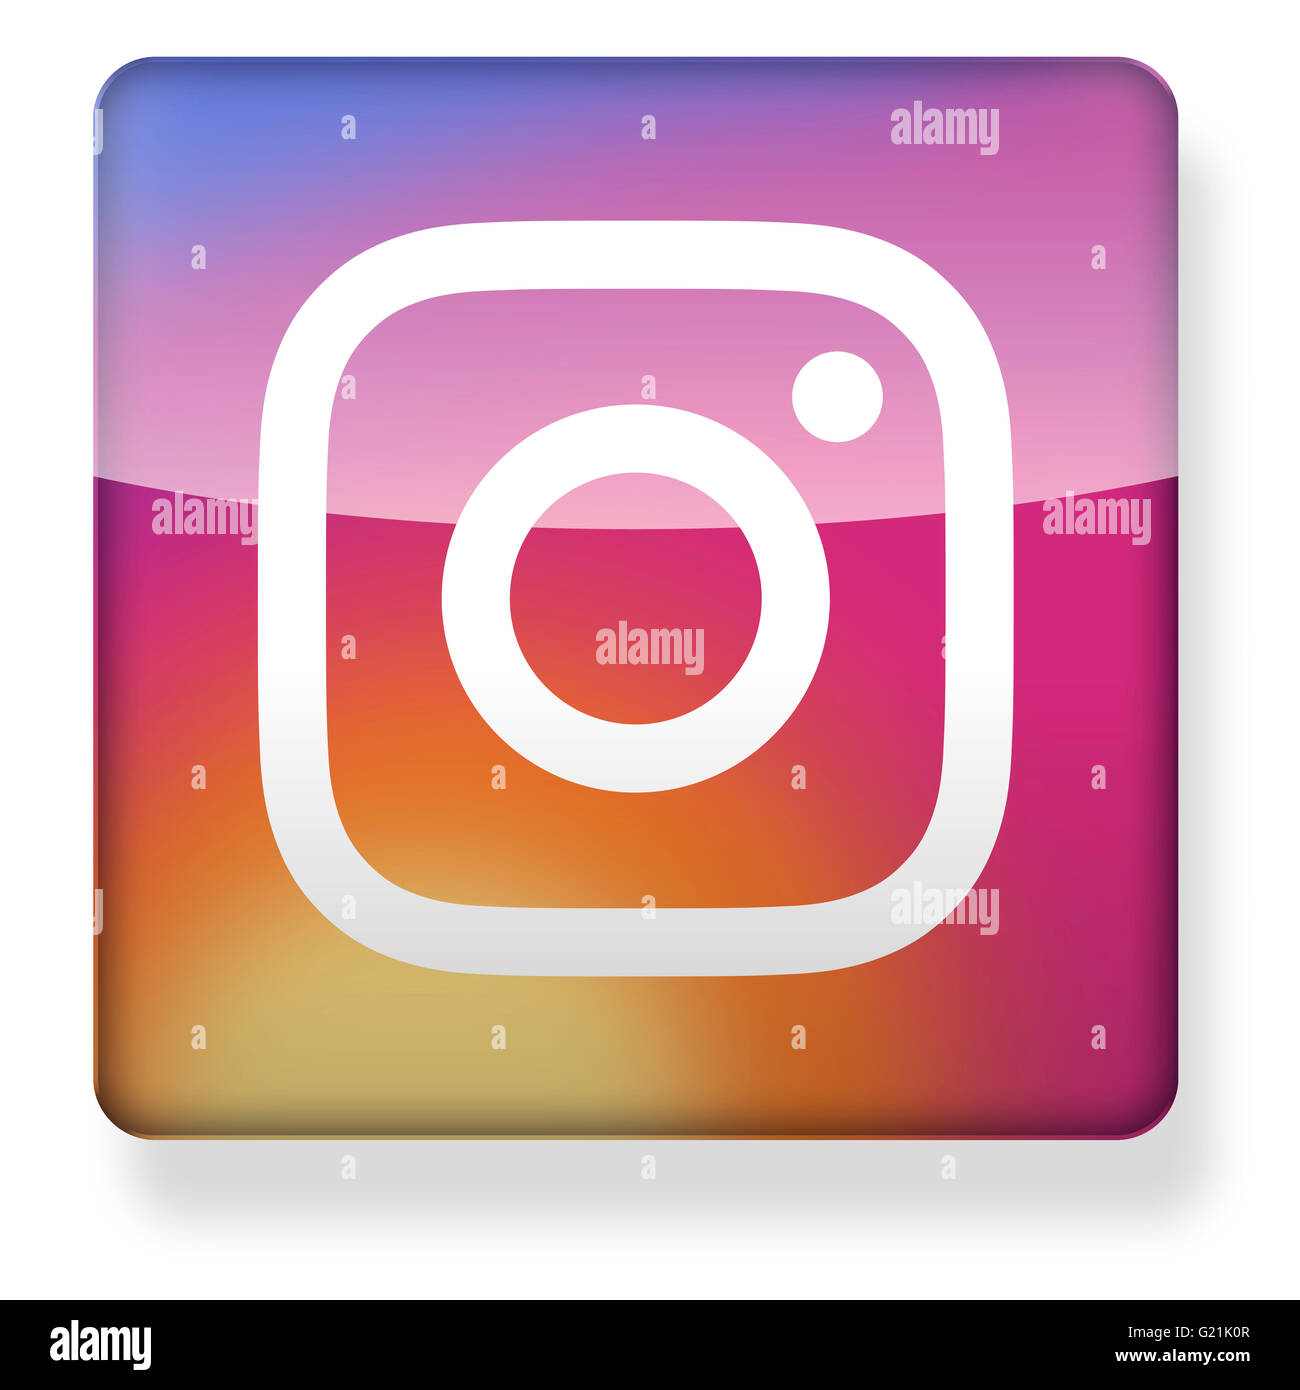 New Instagram logo as an app icon. Clipping path included. Stock Photo